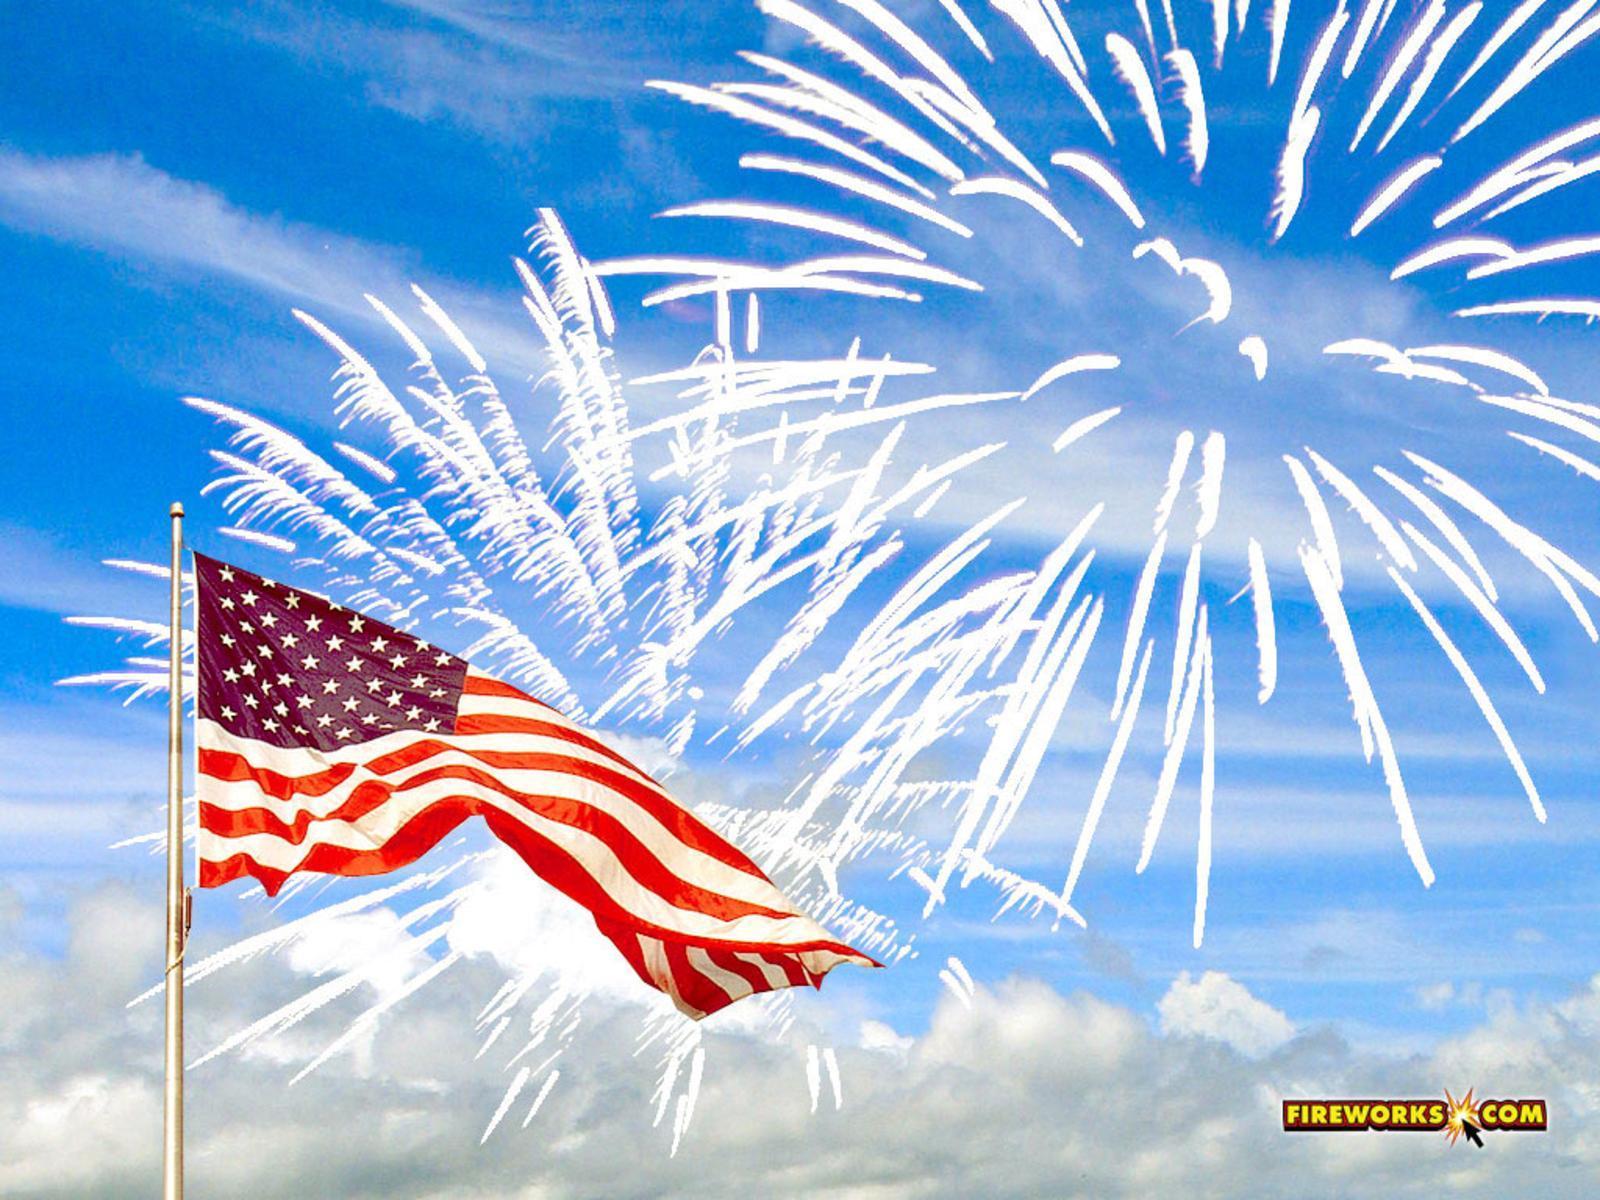 Happy fourth of july memorial day free desktop background